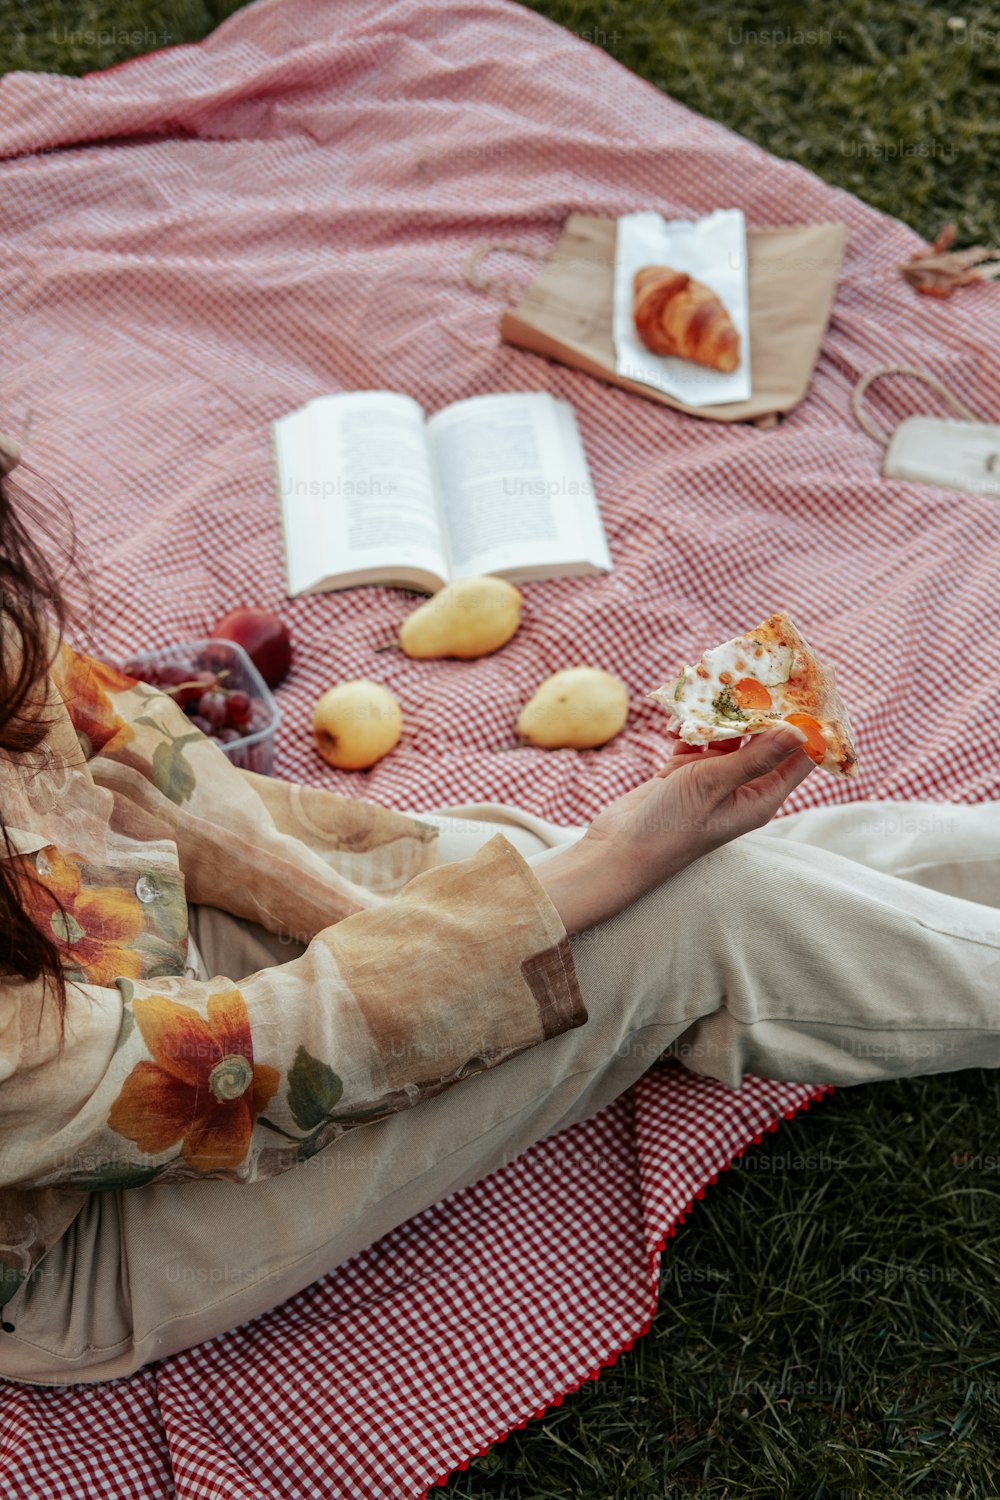 a woman sitting on a blanket eating food